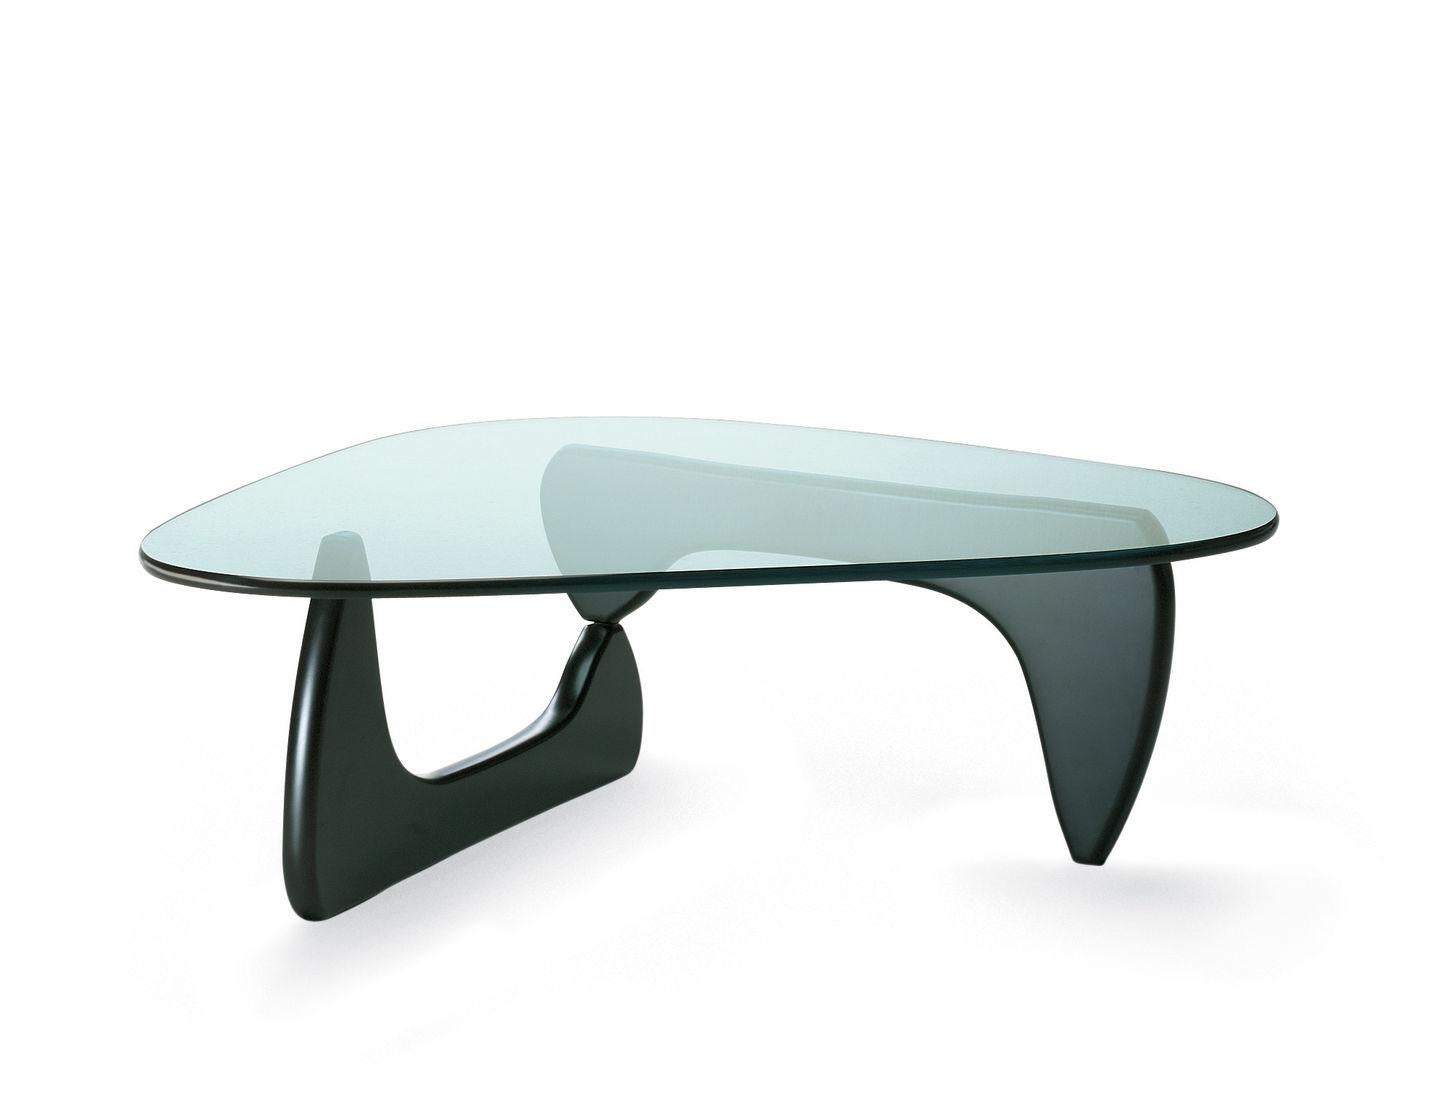 Sculptural coffee table designed by Isamu Noguchi in 1944.
Manufactured by Vitra, Switzerland.

The organic forms of the coffee table designed by Isamu Noguchi, who was active both as a sculptor and designer, are reminiscent of his biomorphic